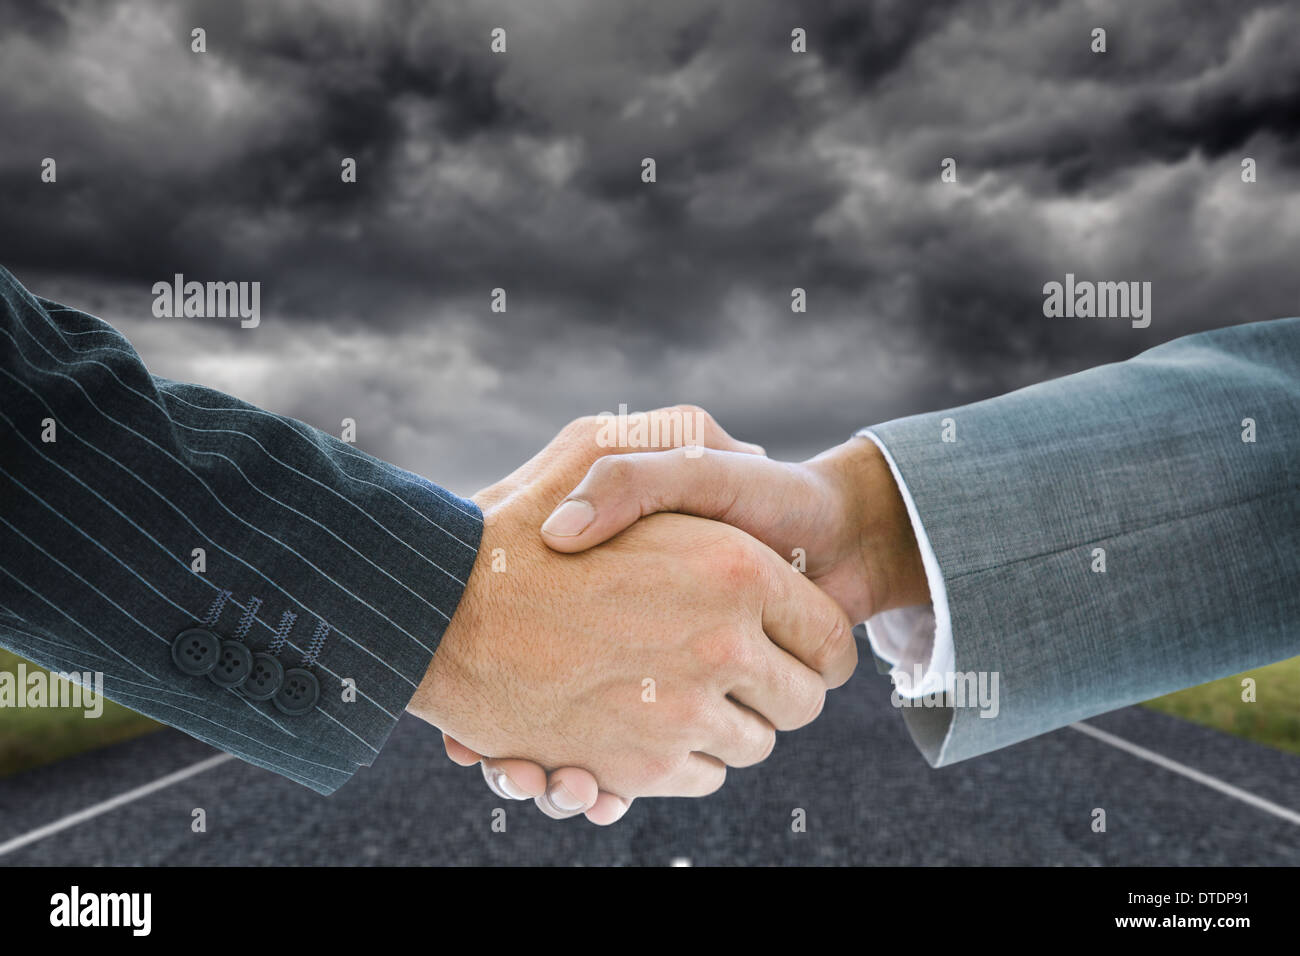 Composite image of business handshake against storm Stock Photo